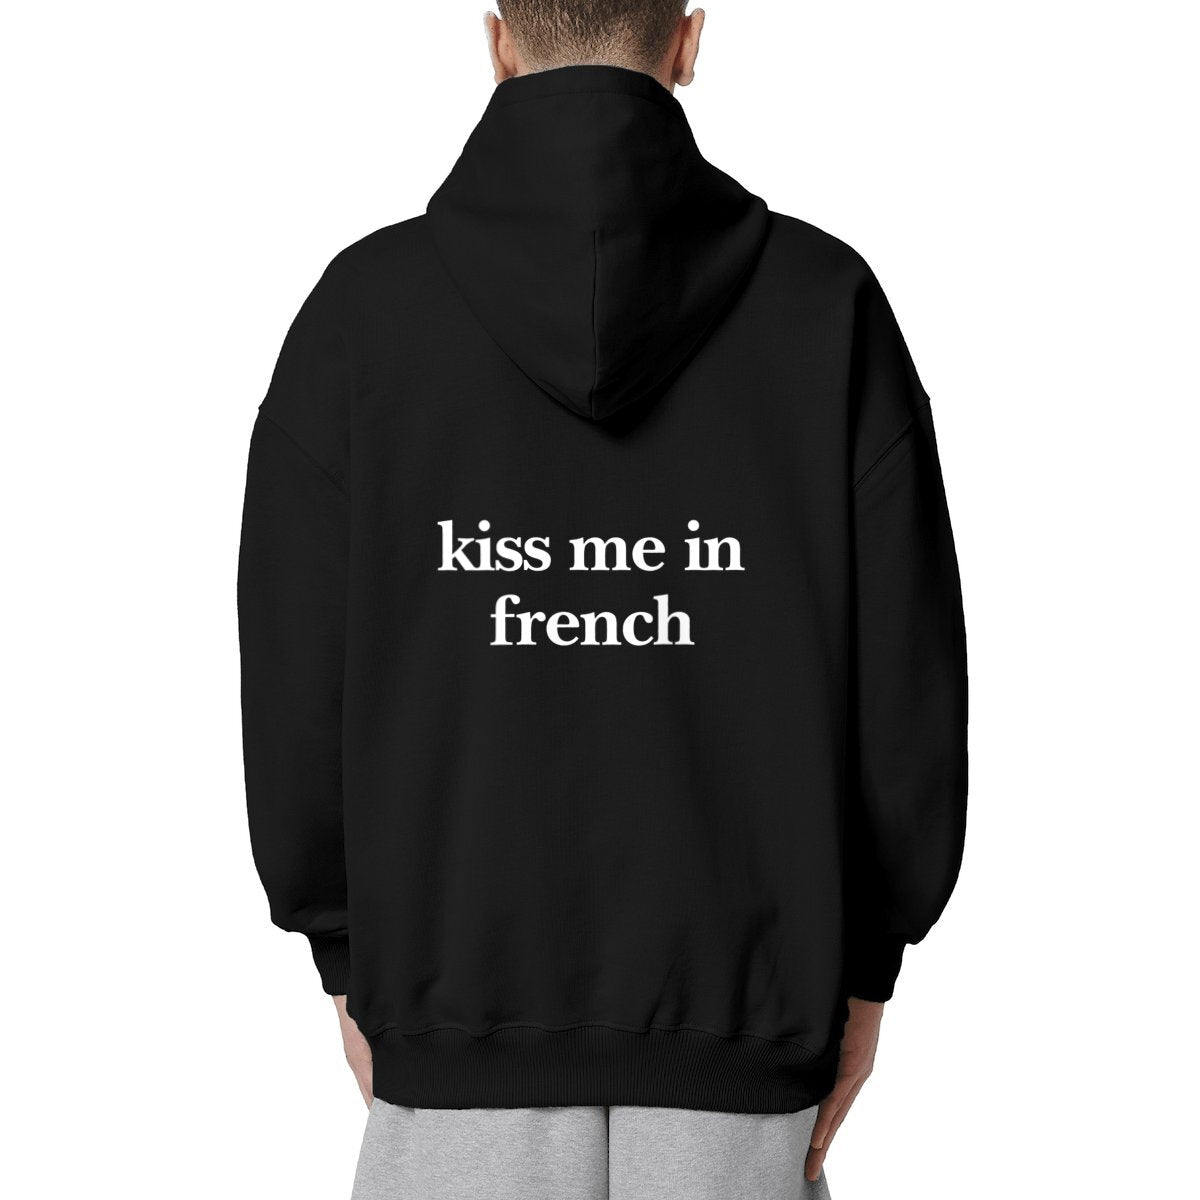 kiss me in french hoodie oversized. garçon garçon essentiel oversized hoodie. Sleek in black and whispering Parisian chic, this hoodie is the sartorial whisper of 'garçon garçon' — a statement of understated elegance. Perfect for those who carry a piece of Paris in their hearts and a touch of audacity on their sleeves.